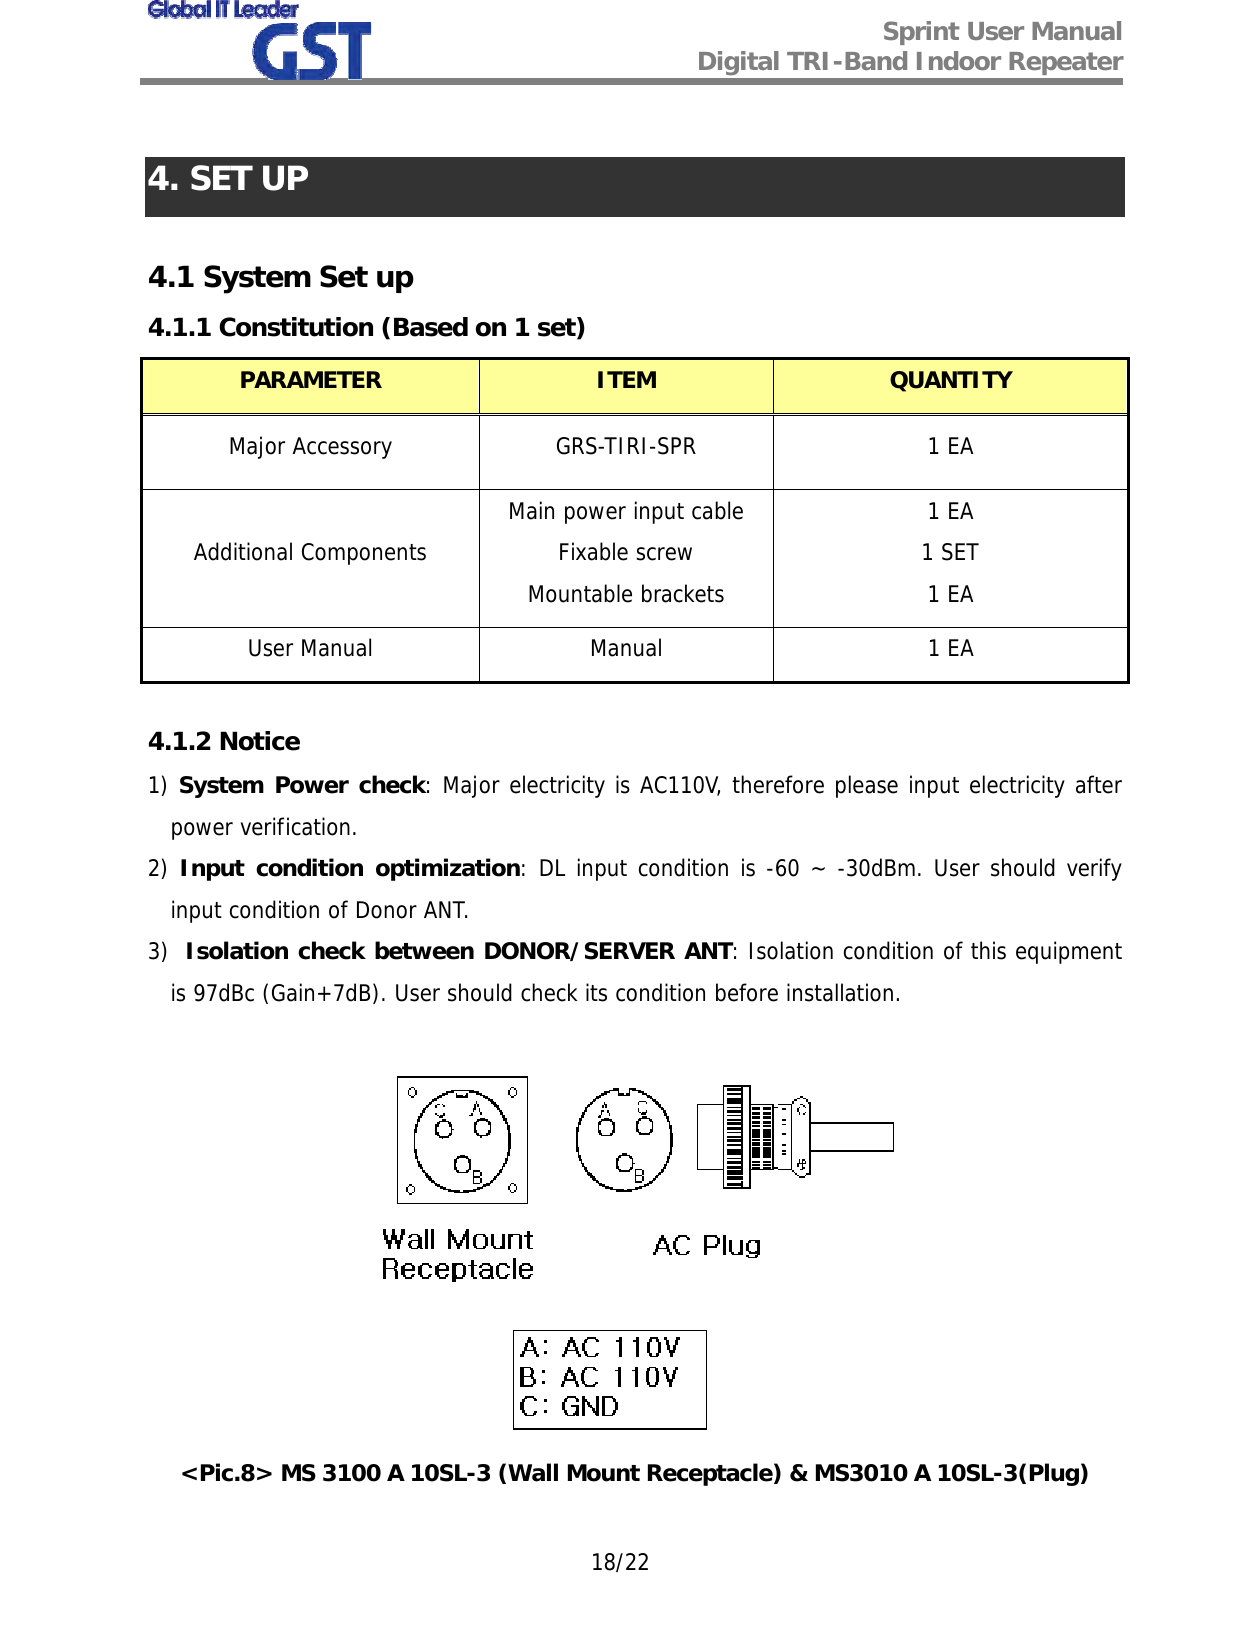  Sprint User Manual Digital TRI-Band Indoor Repeater   18/22  4. SET UP  4.1 System Set up 4.1.1 Constitution (Based on 1 set) PARAMETER  ITEM  QUANTITY Major Accessory  GRS-TIRI-SPR  1 EA Additional Components Main power input cable Fixable screw Mountable brackets 1 EA 1 SET 1 EA User Manual  Manual  1 EA  4.1.2 Notice 1) System Power check: Major electricity is AC110V, therefore please input electricity after power verification. 2) Input condition optimization: DL input condition is -60 ~ -30dBm. User should verify input condition of Donor ANT. 3)  Isolation check between DONOR/SERVER ANT: Isolation condition of this equipment is 97dBc (Gain+7dB). User should check its condition before installation.   &lt;Pic.8&gt; MS 3100 A 10SL-3 (Wall Mount Receptacle) &amp; MS3010 A 10SL-3(Plug)  